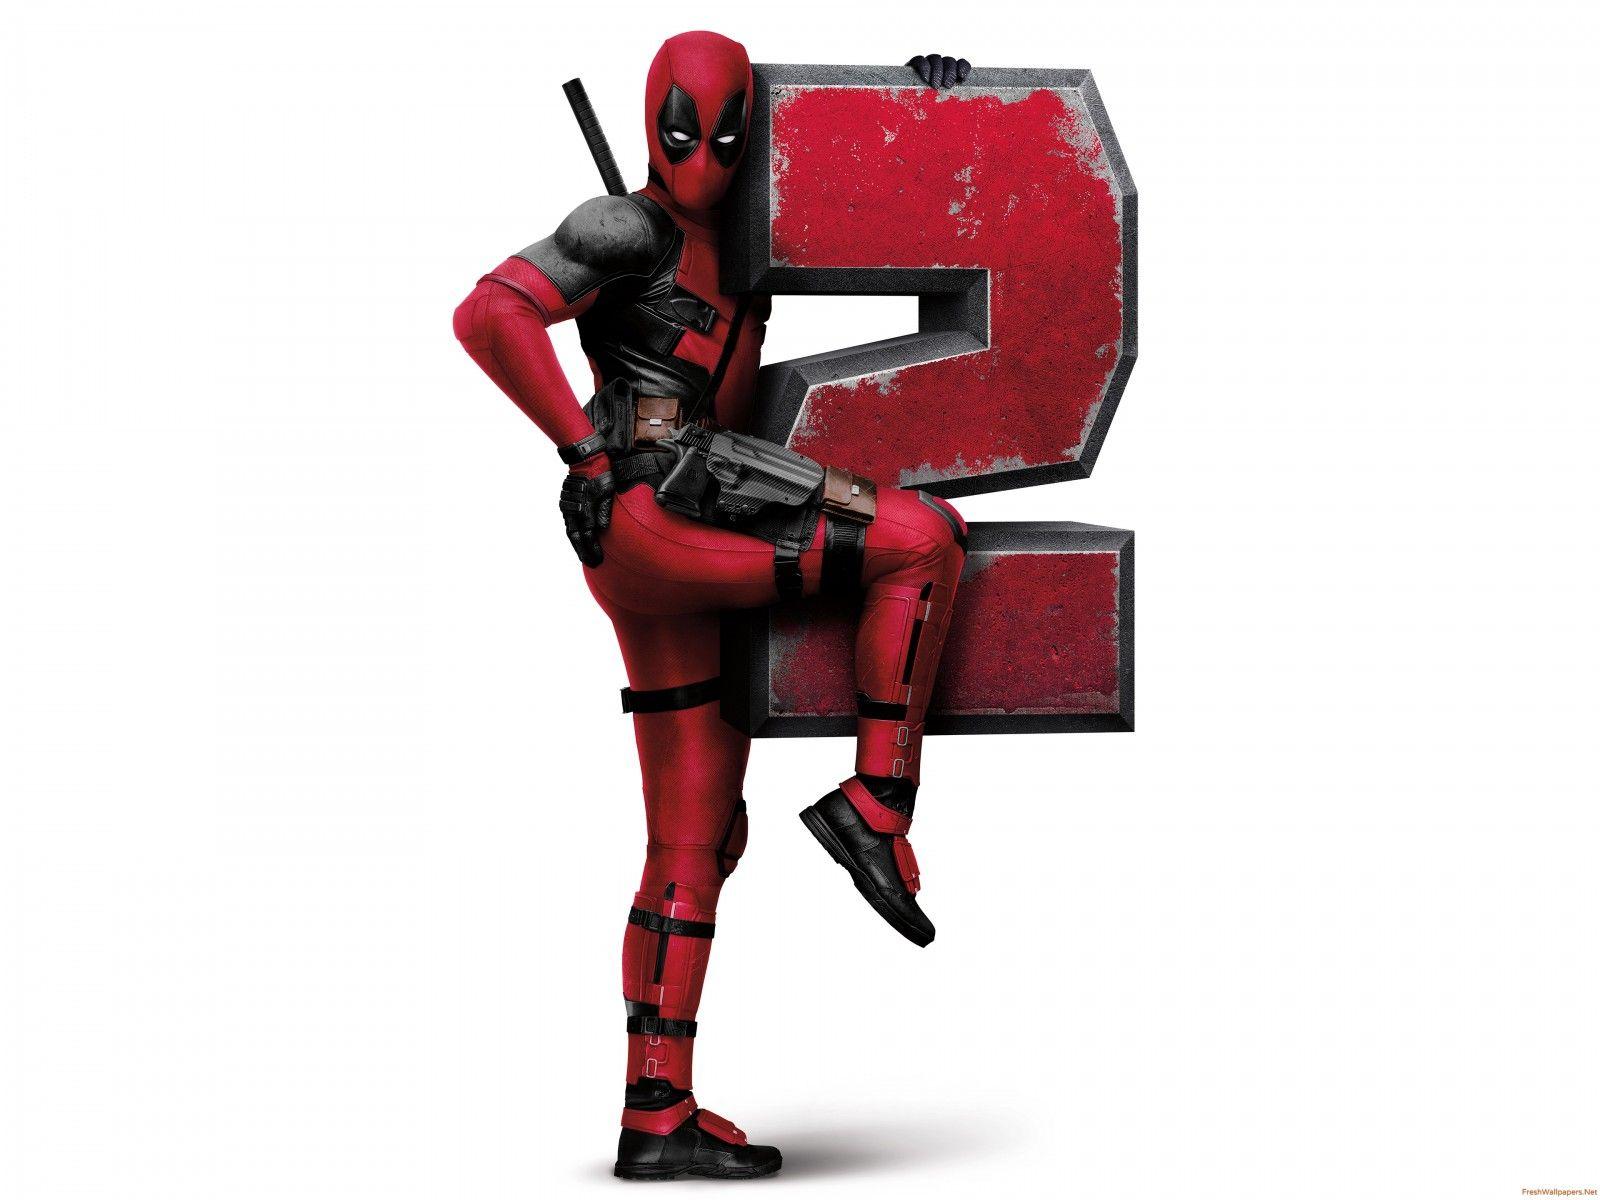 Deadpool 2 Movie Poster Wallpapers